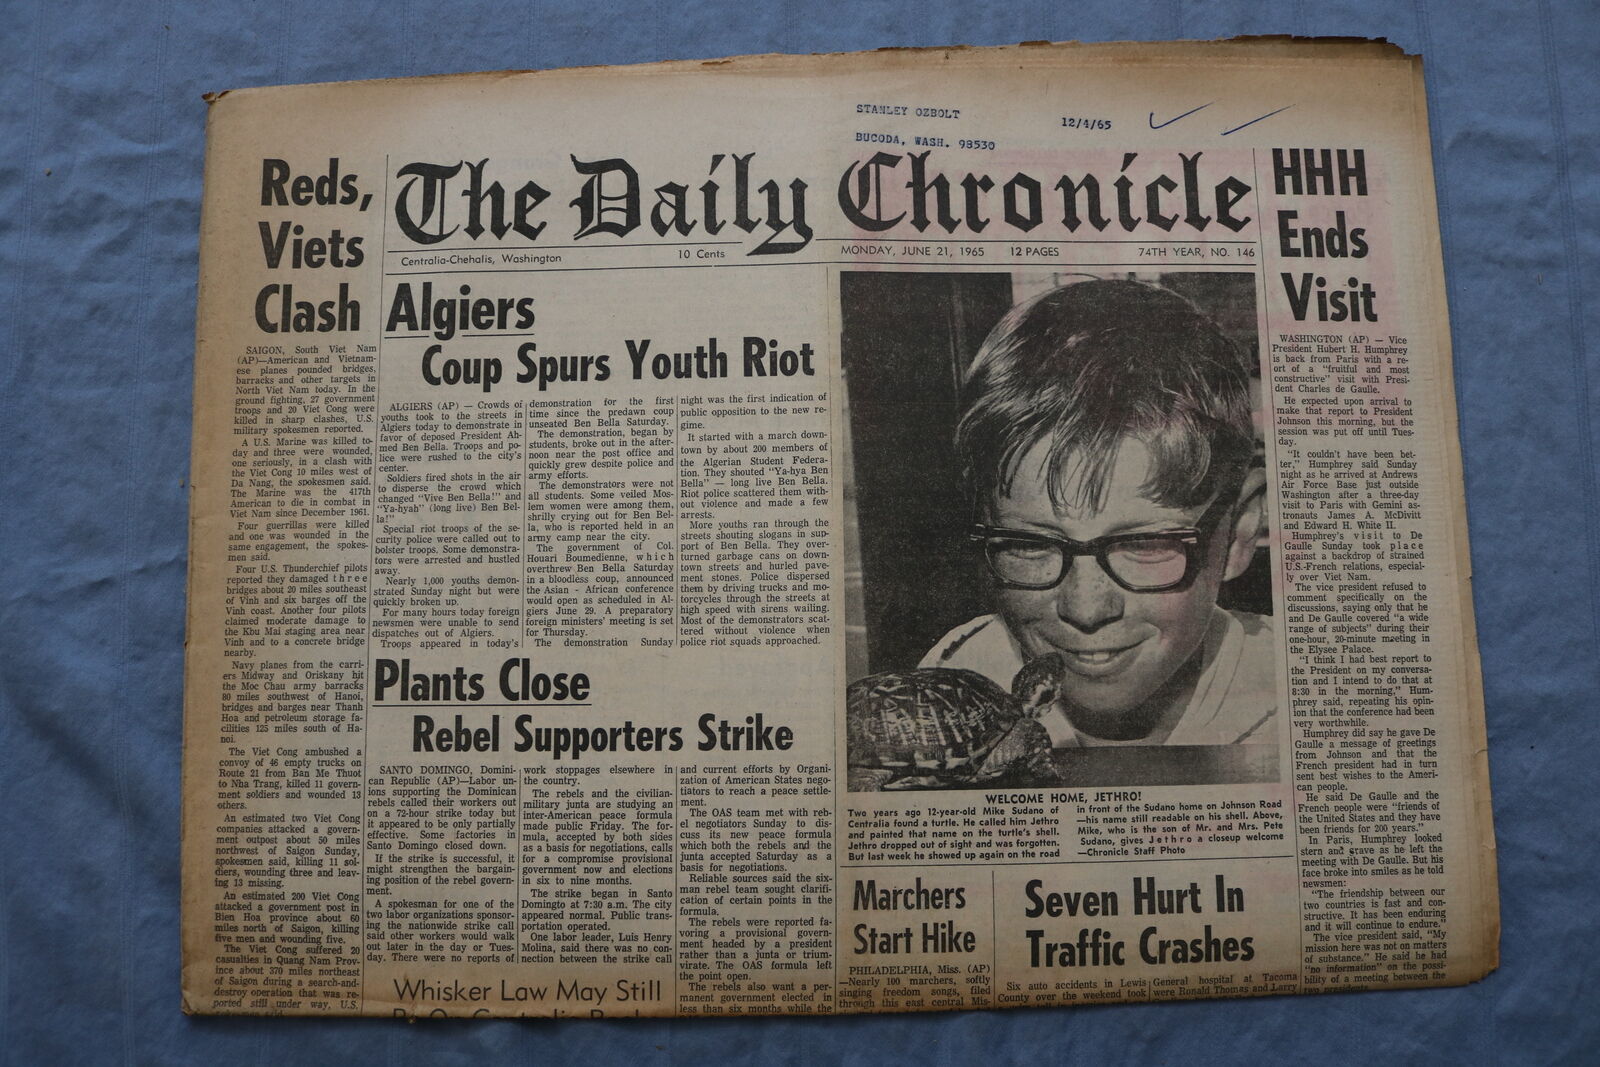 1965 JUNE 21 THE DAILY CHRONICLE NEWSPAPER - REDS, VIETS CLASH - NP 8527